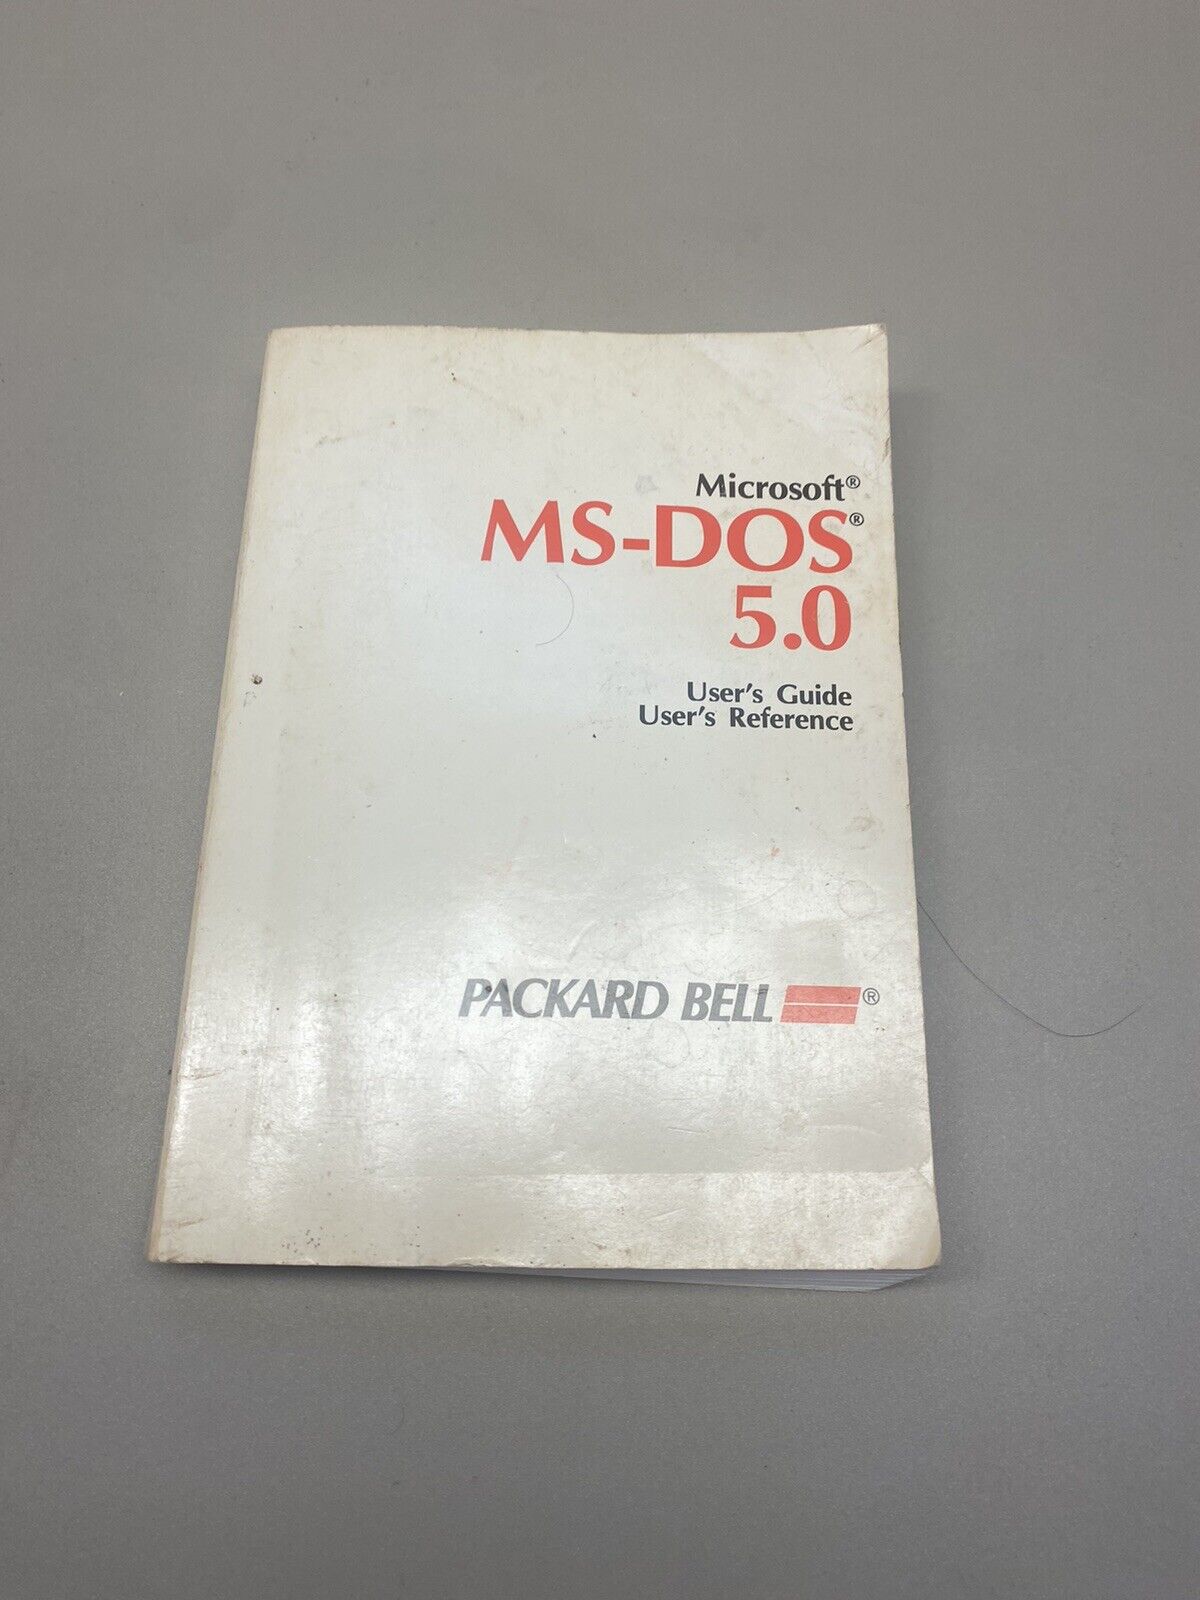 Microsoft Vintage MS-DOS 5.0 Users Guide Packard Bell Good Cond 1991